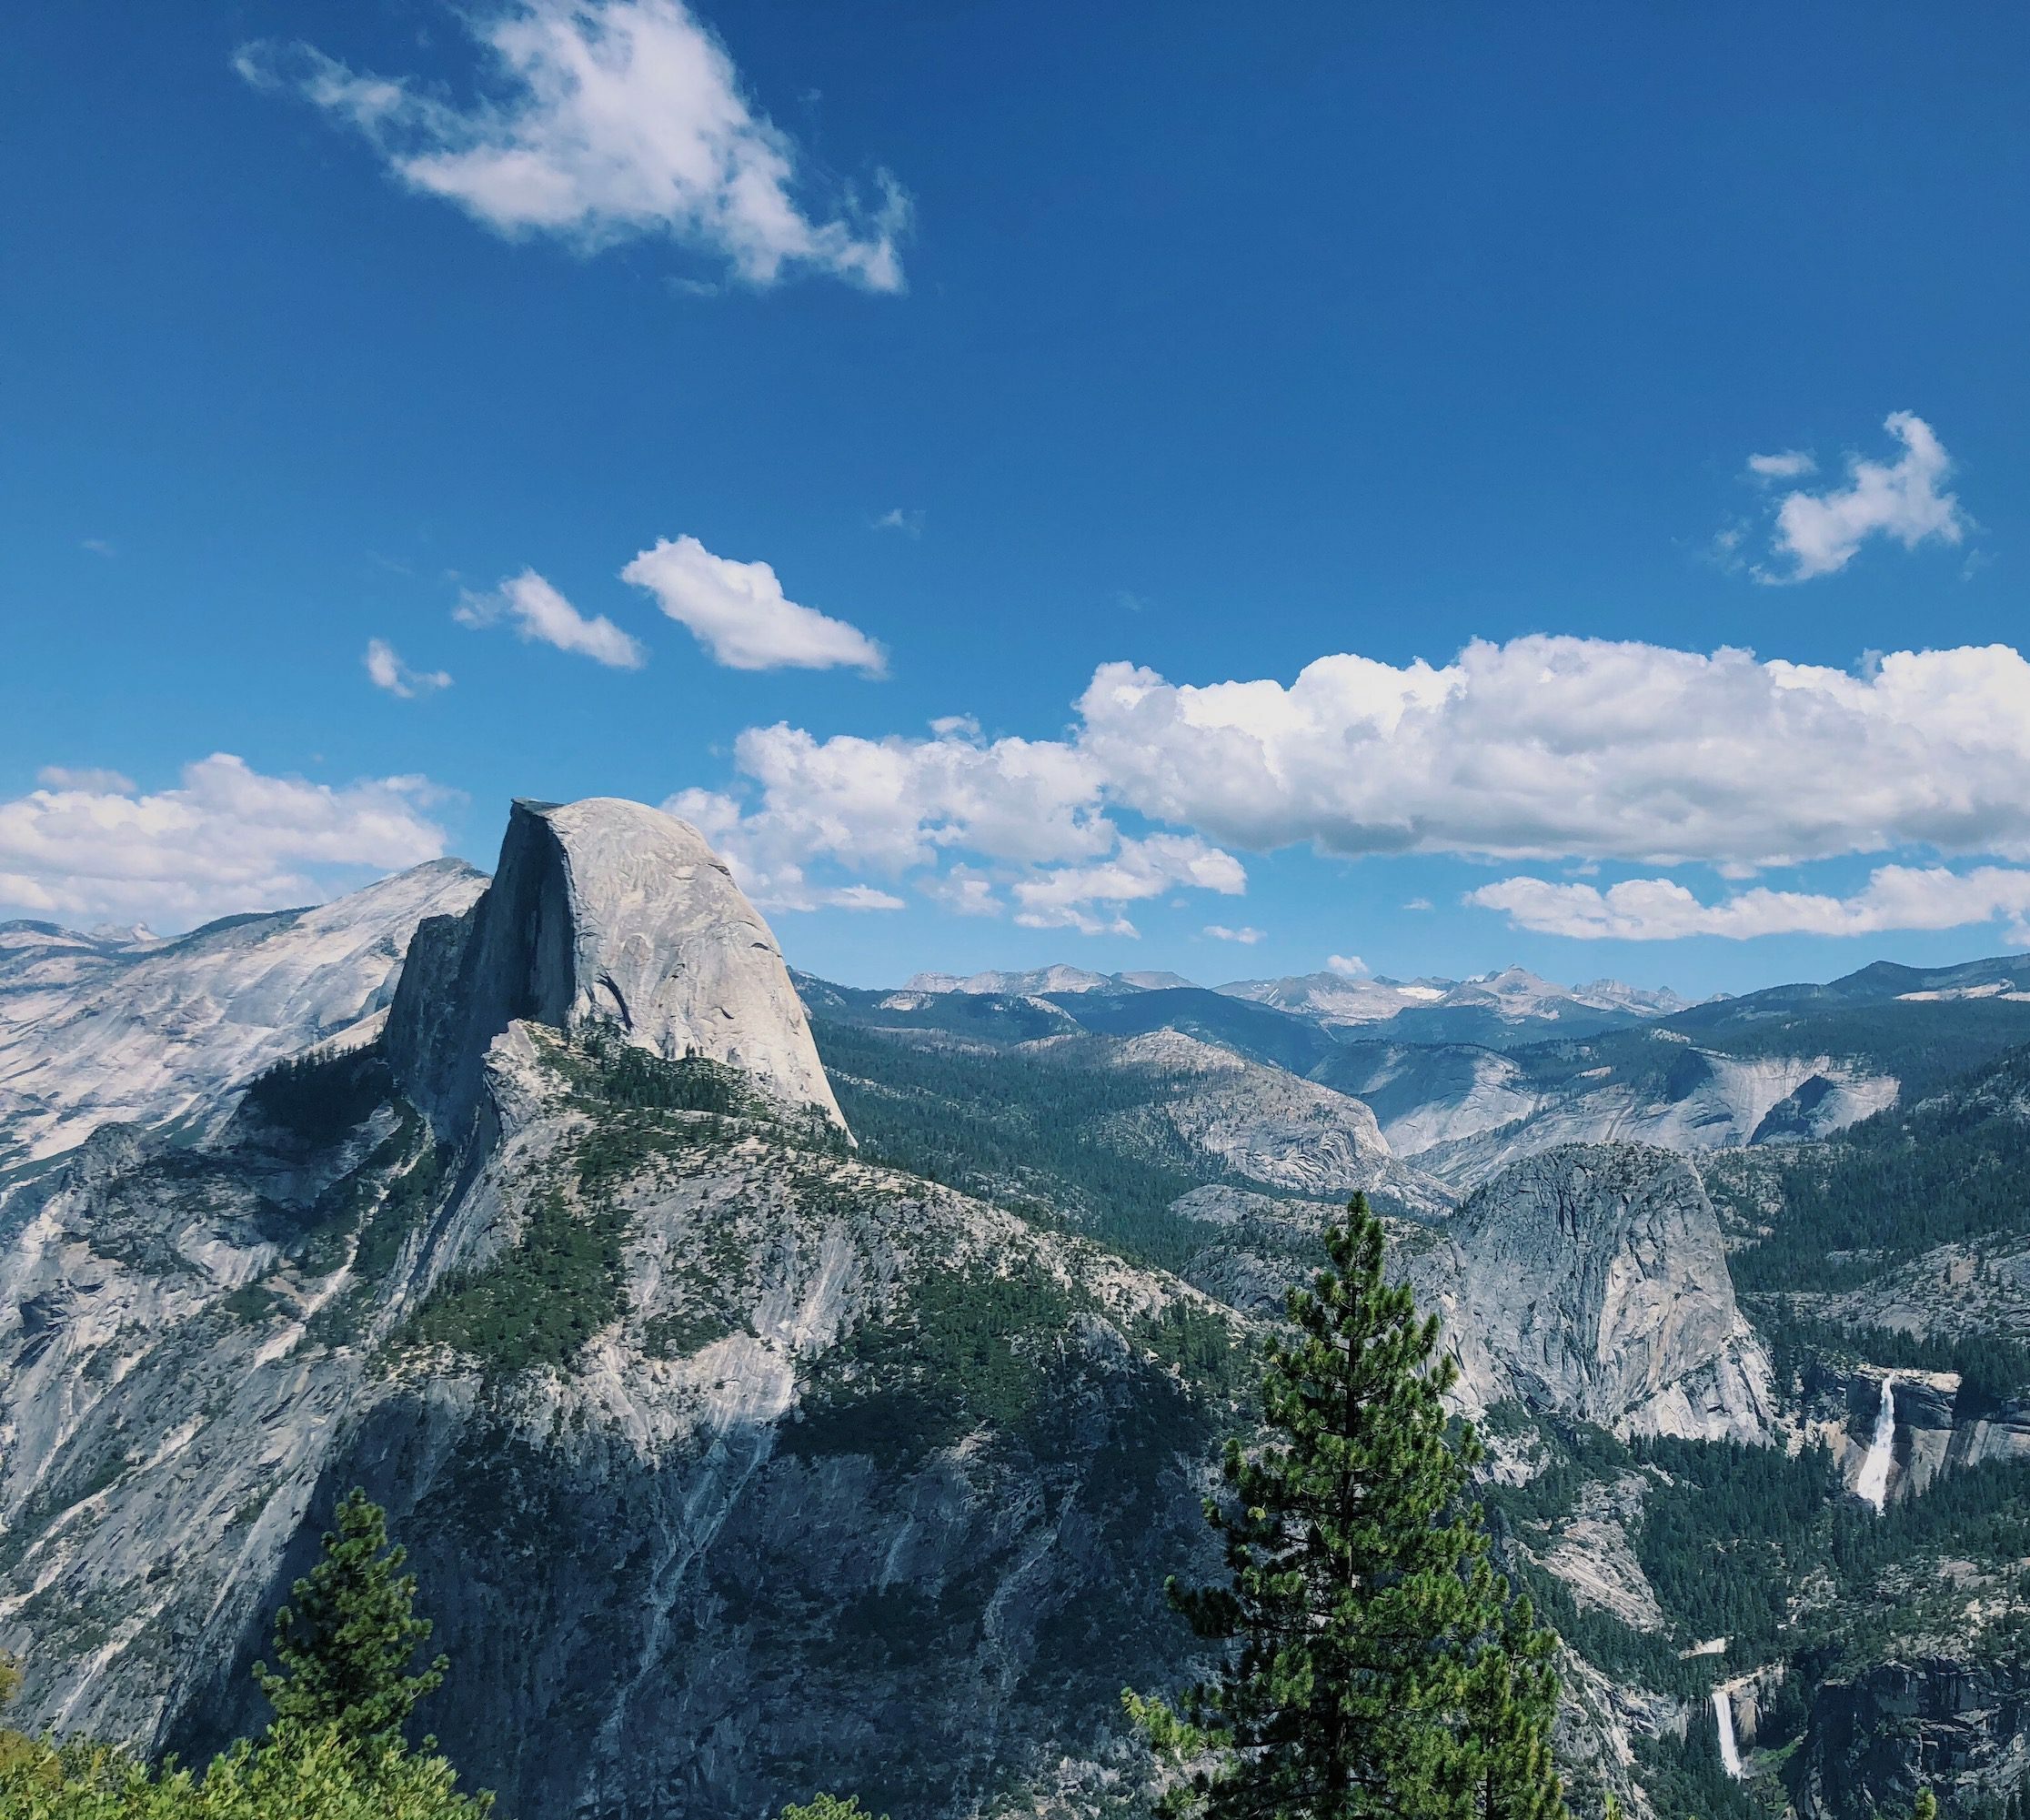 Experience a group camping adventure in Yosemite National Park.